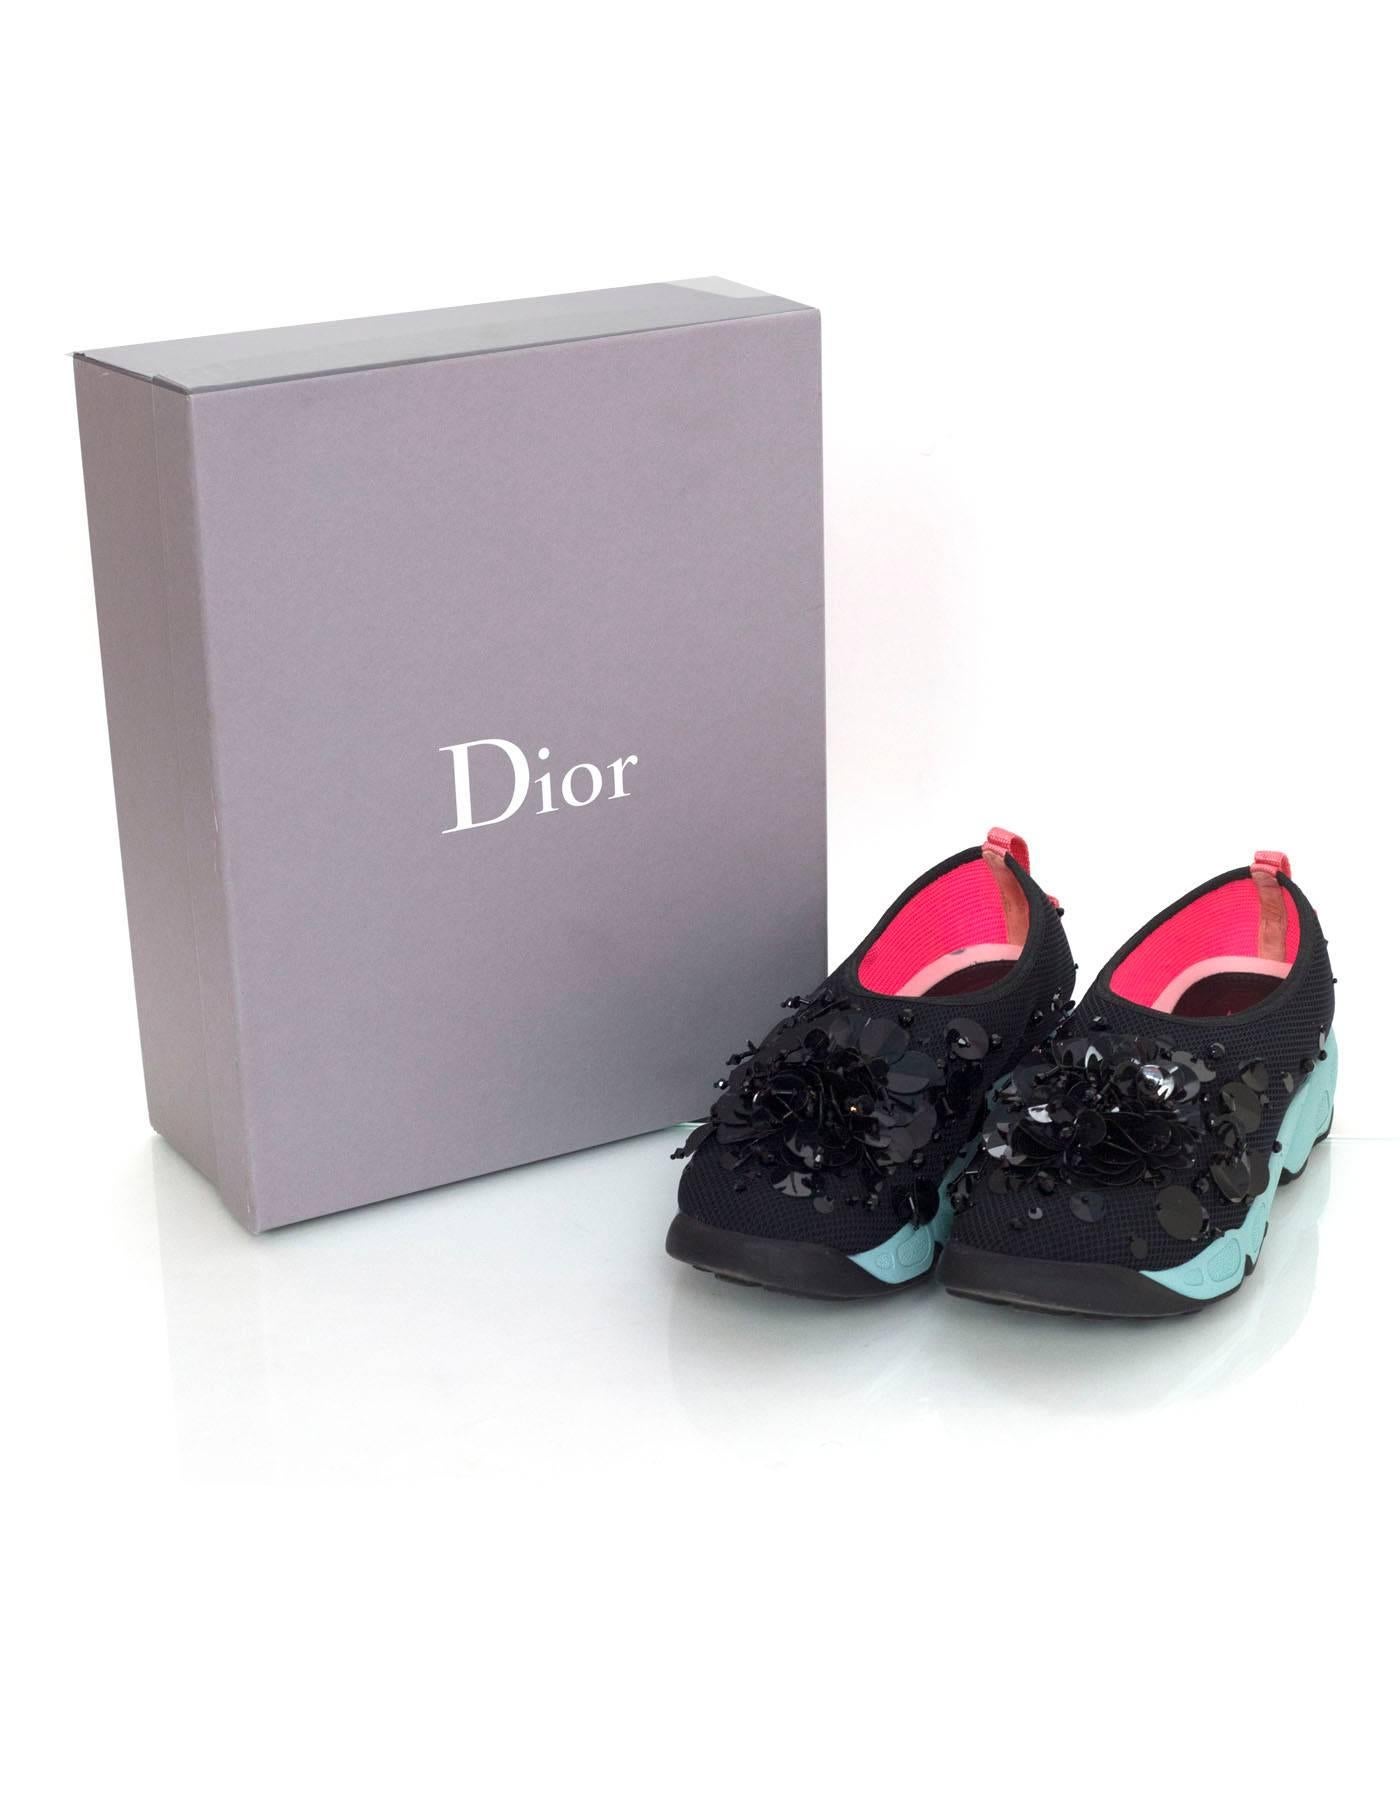 Christian Dior Black and Blue Beaded Fusion Sneakers Sz 38.5 w/ Box 4